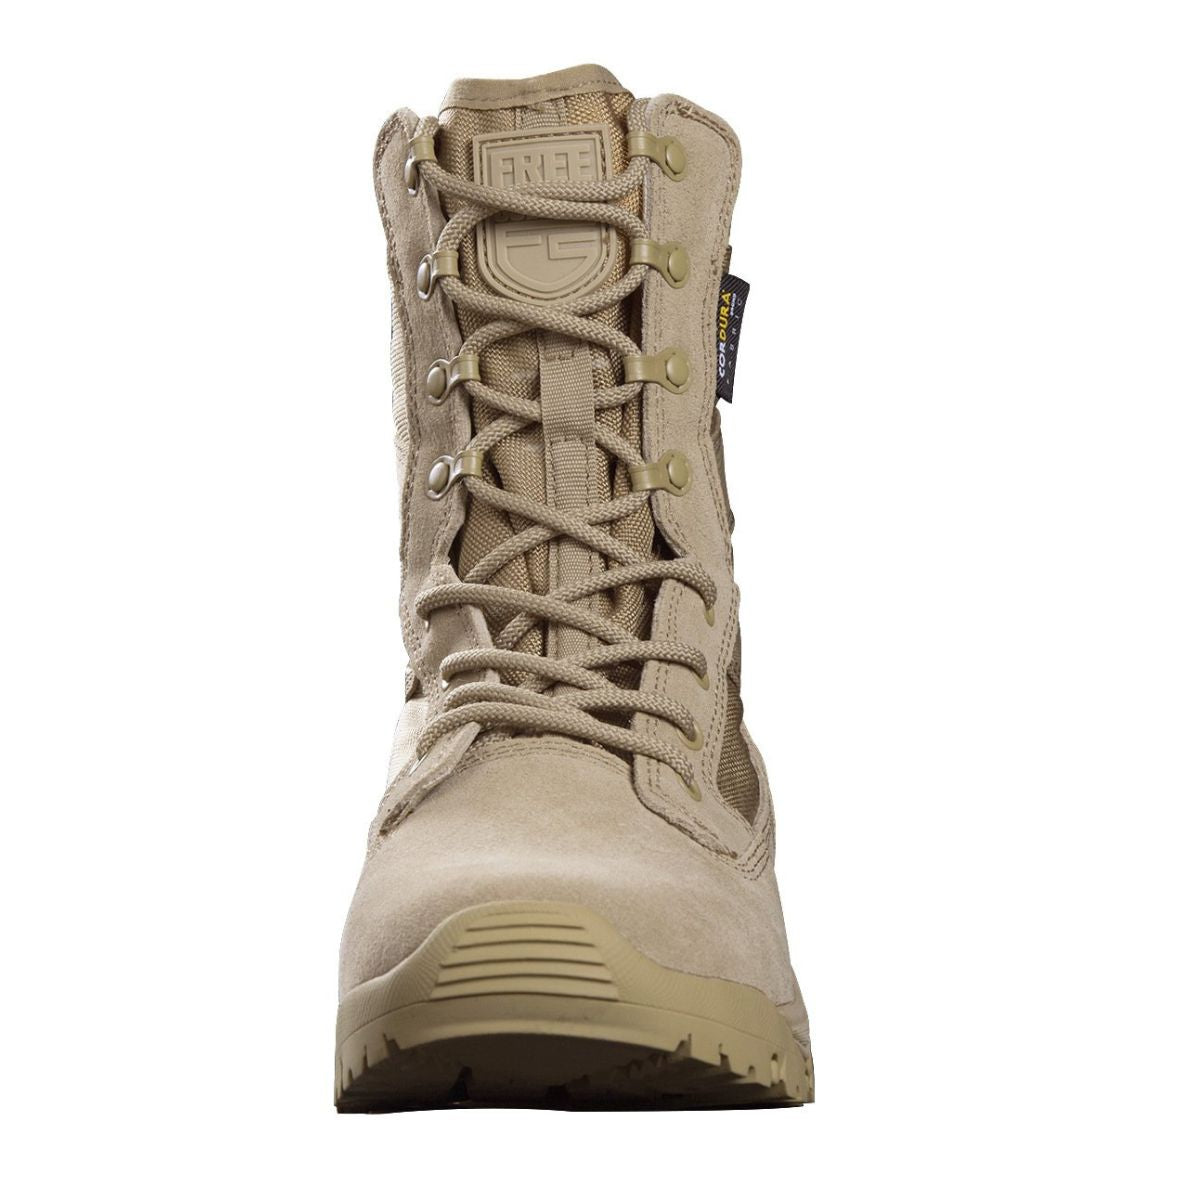 8 inch Thin thick Military Work Boots